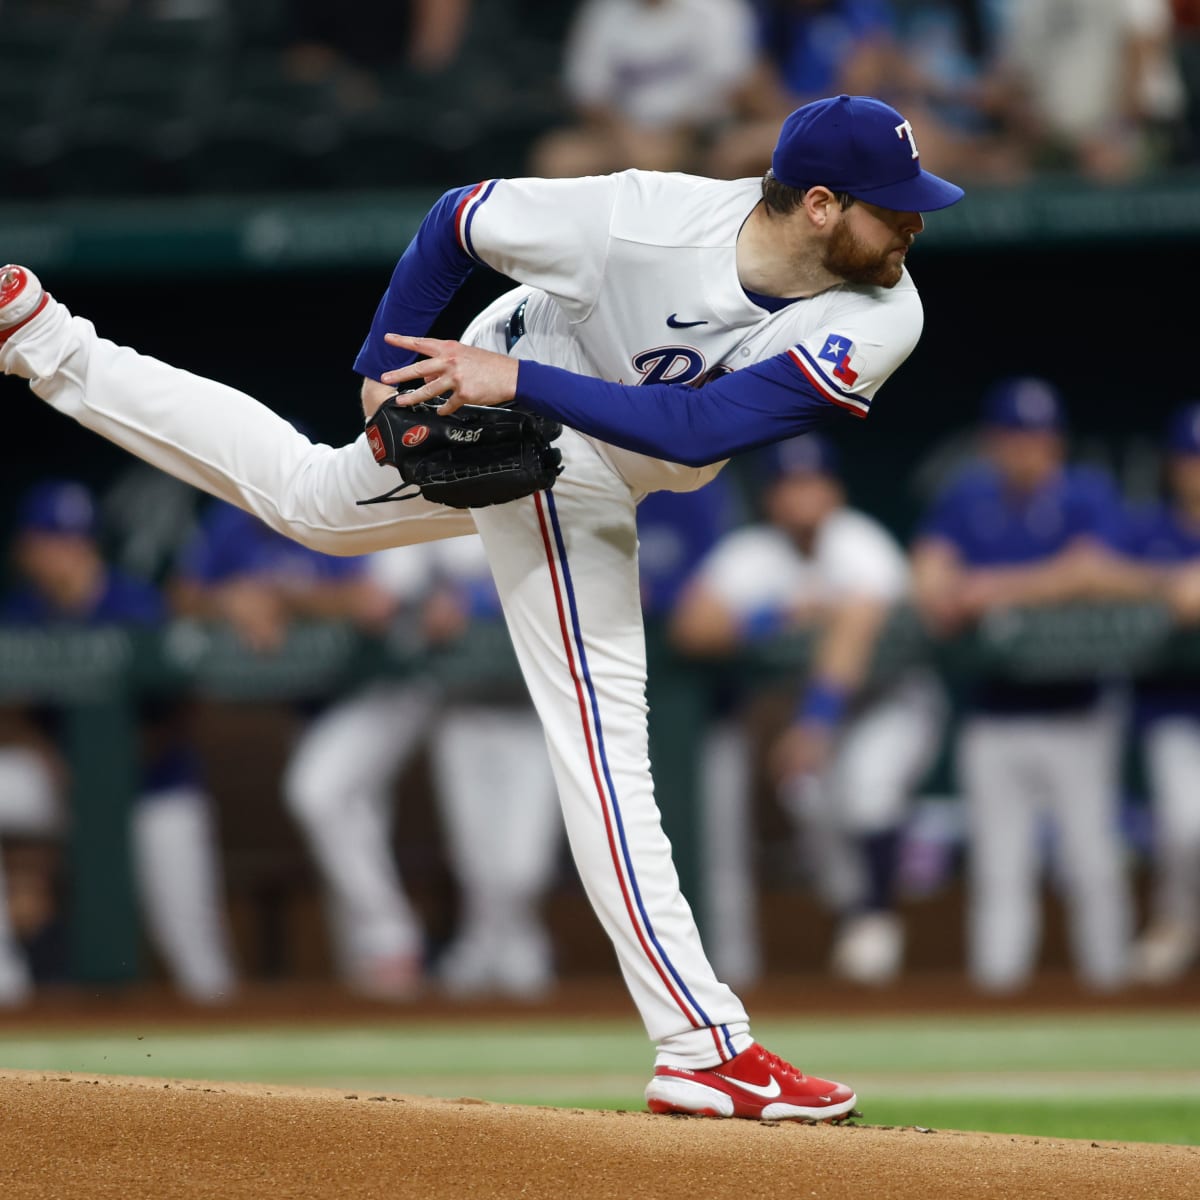 What are the Rangers getting in pitcher Jordan Montgomery?